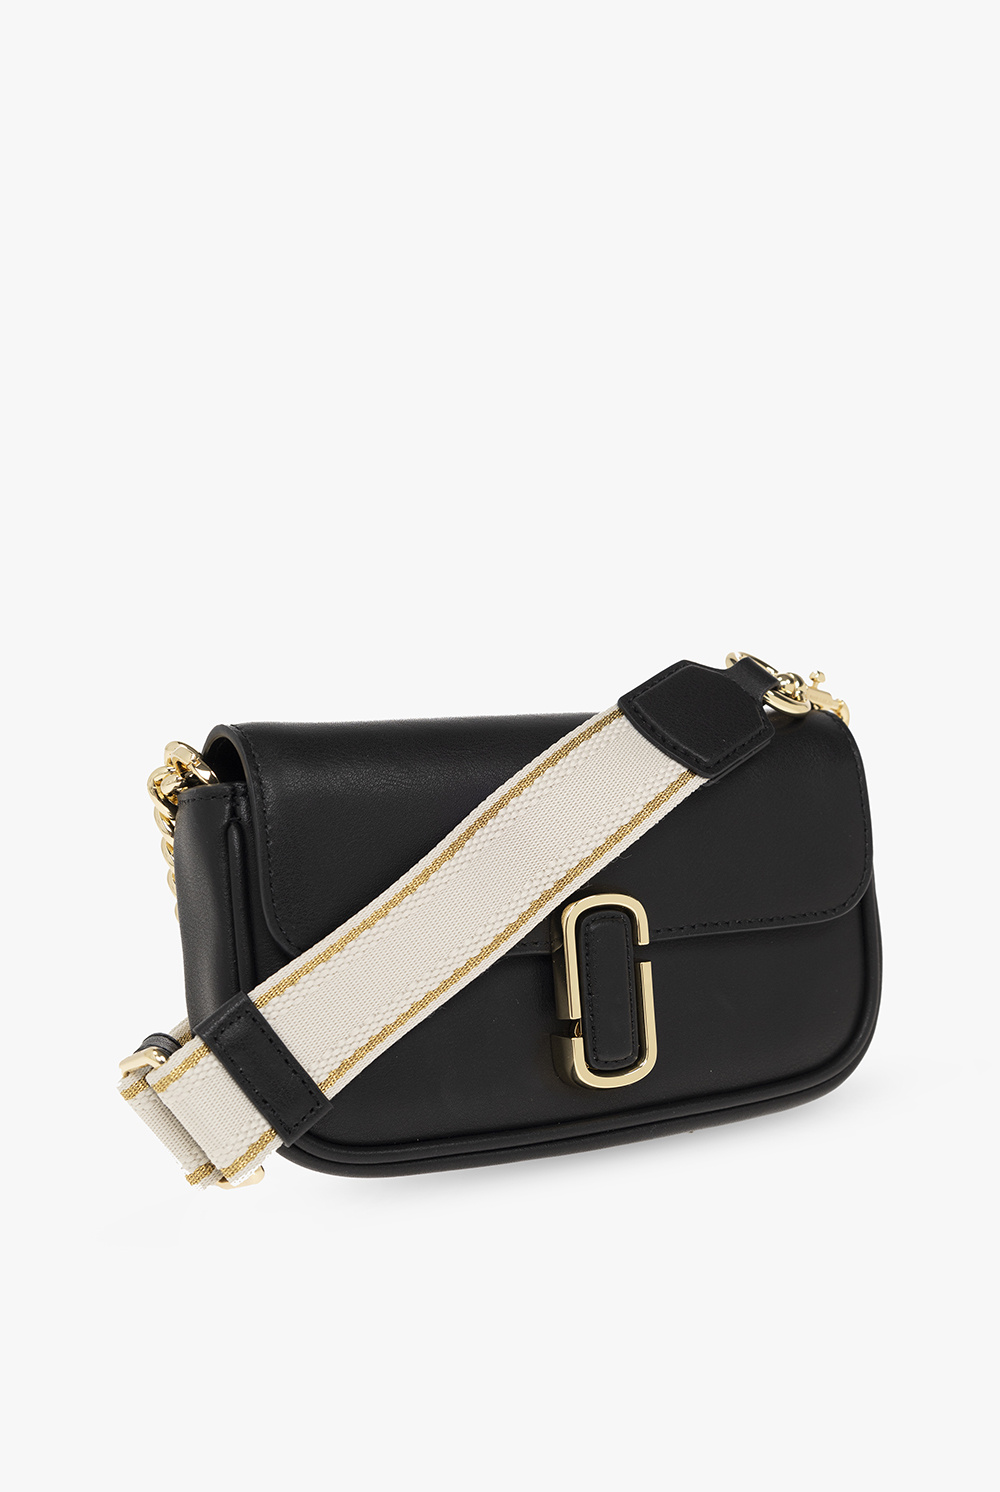 Marc Jacobs Green Magda Archer Edition The Snapshot Bag Marc Jacobs